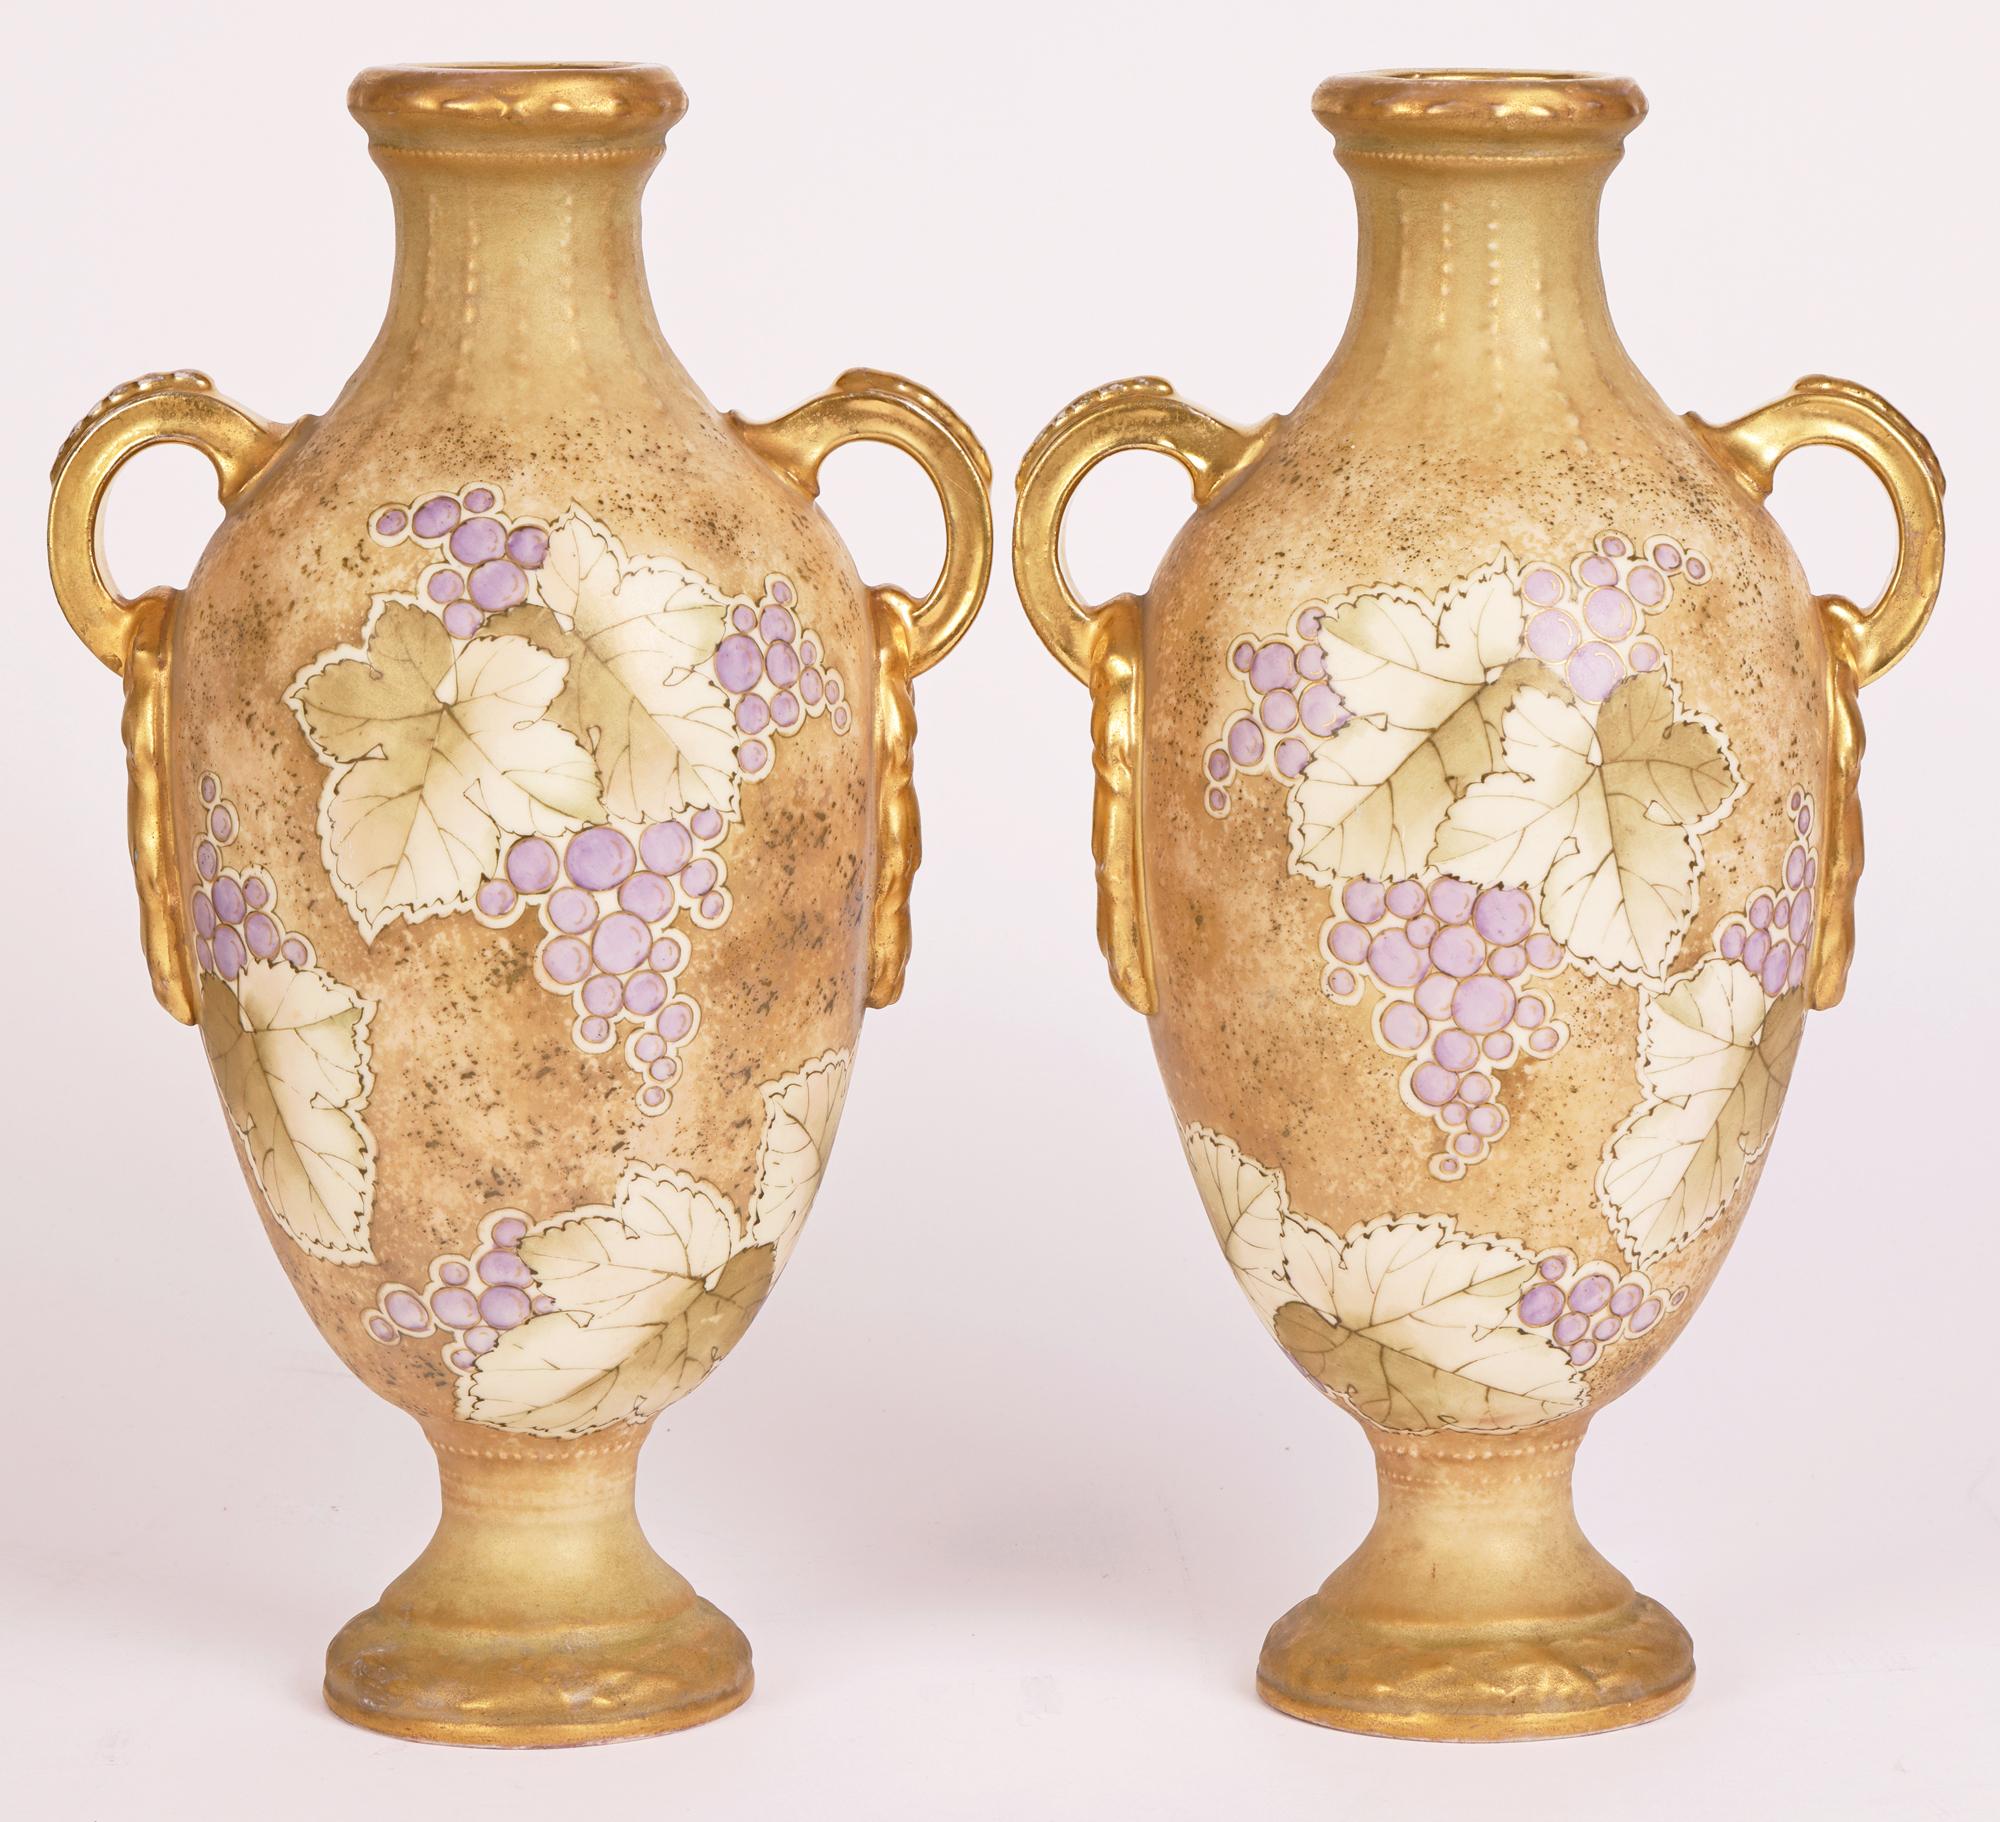 Gilt Turn Teplitz RSK Amphora Pair Art Nouveau Hand-Painted Twin Handled Vases For Sale